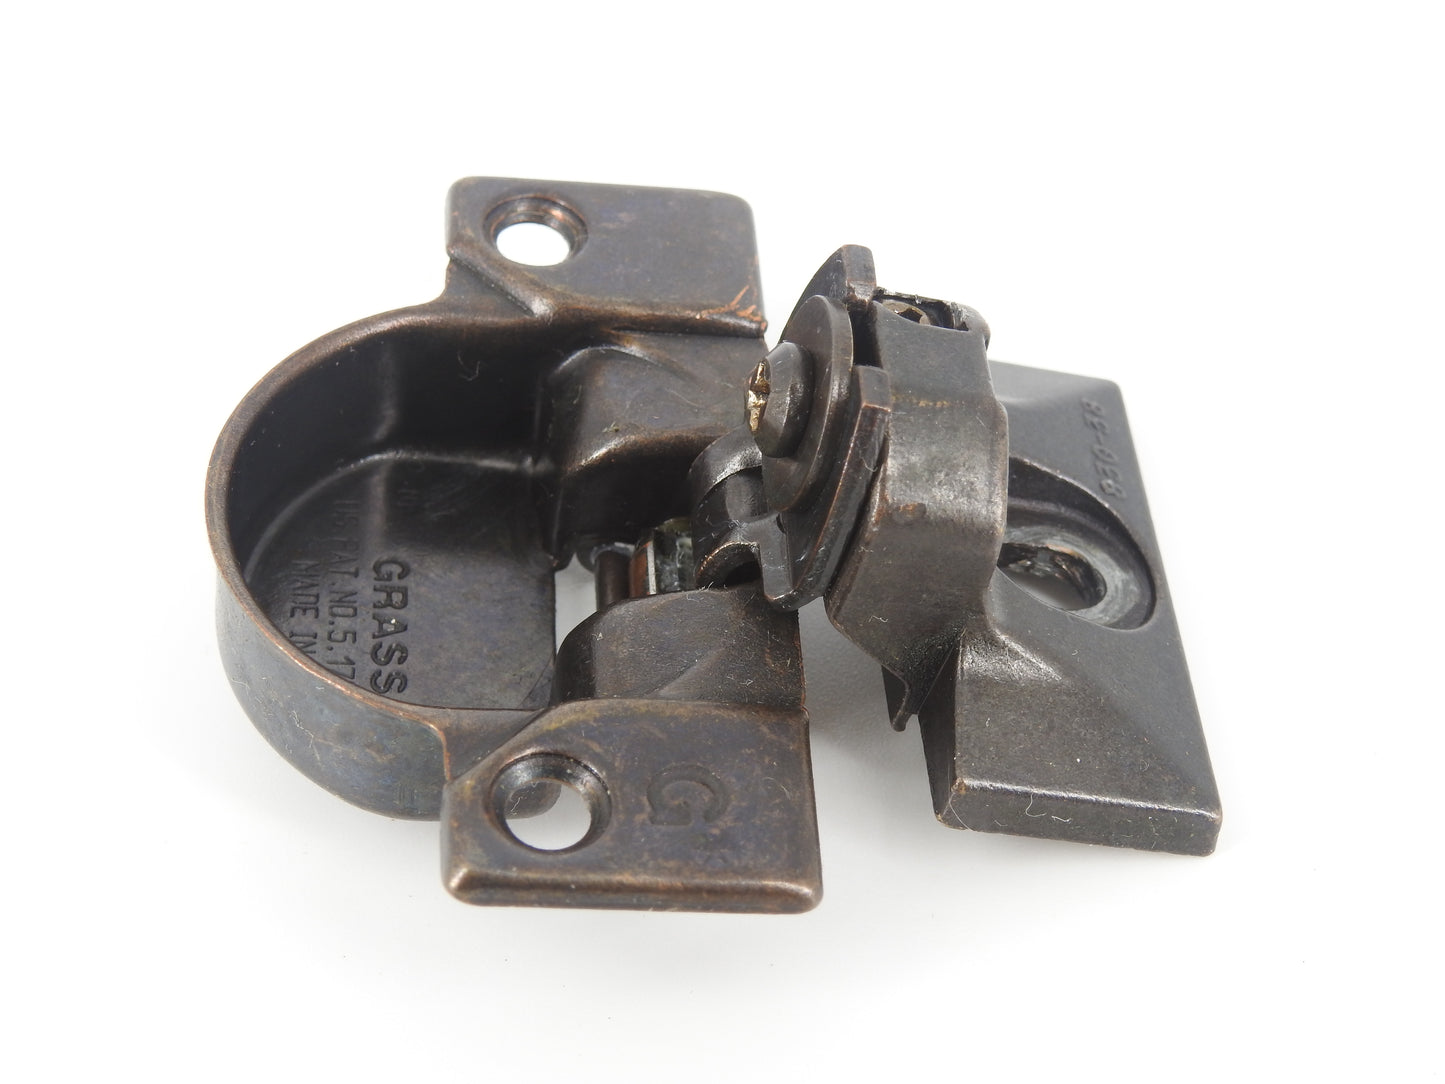 Grass 850 / 830-38 Bronze Hinge and mounting plate - Complete Hinge - Refurbished